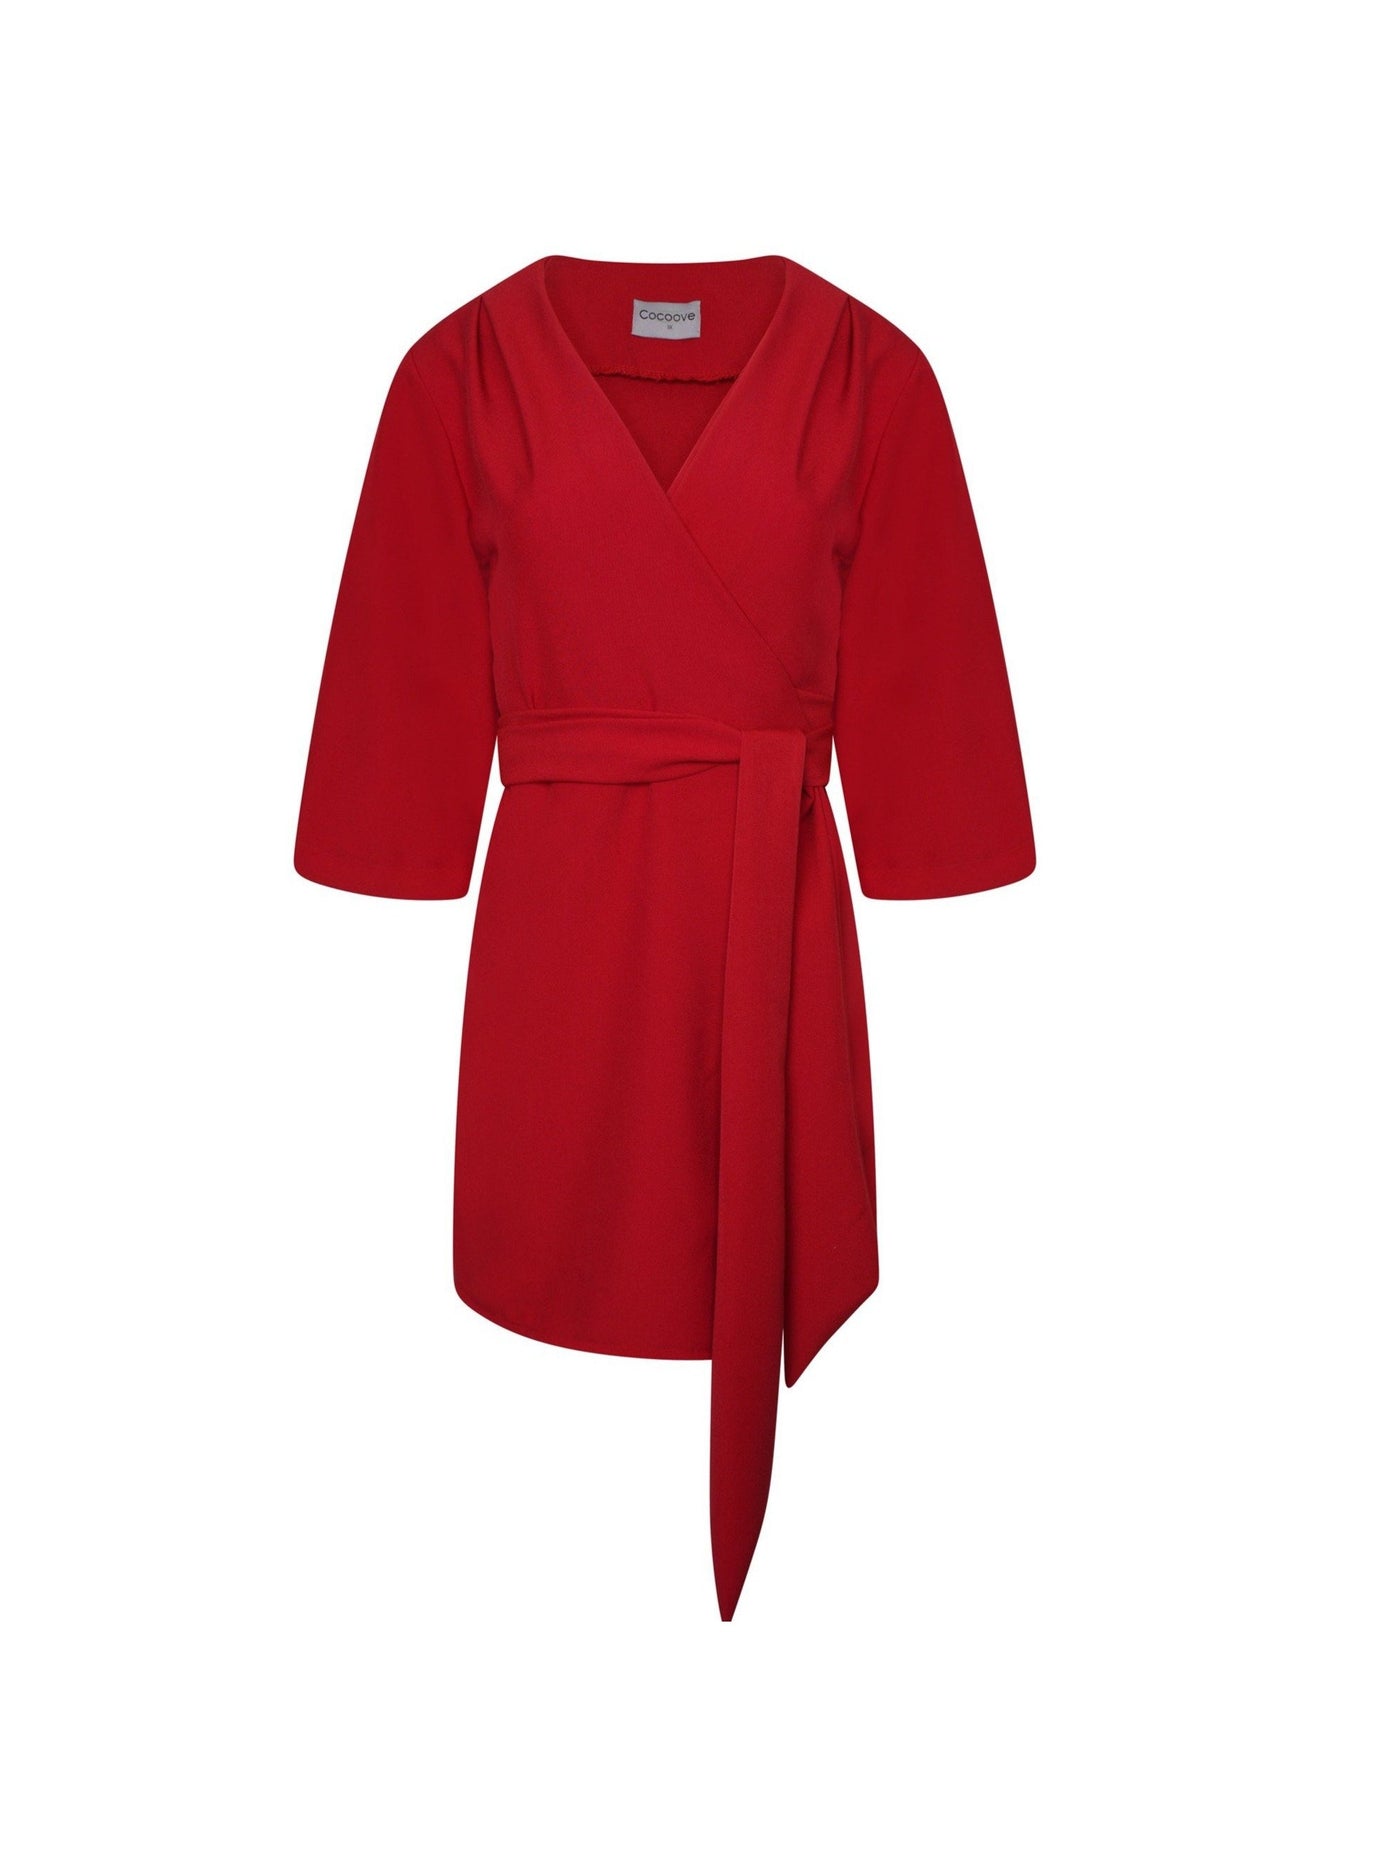 Red wrap dress by COCOOVE